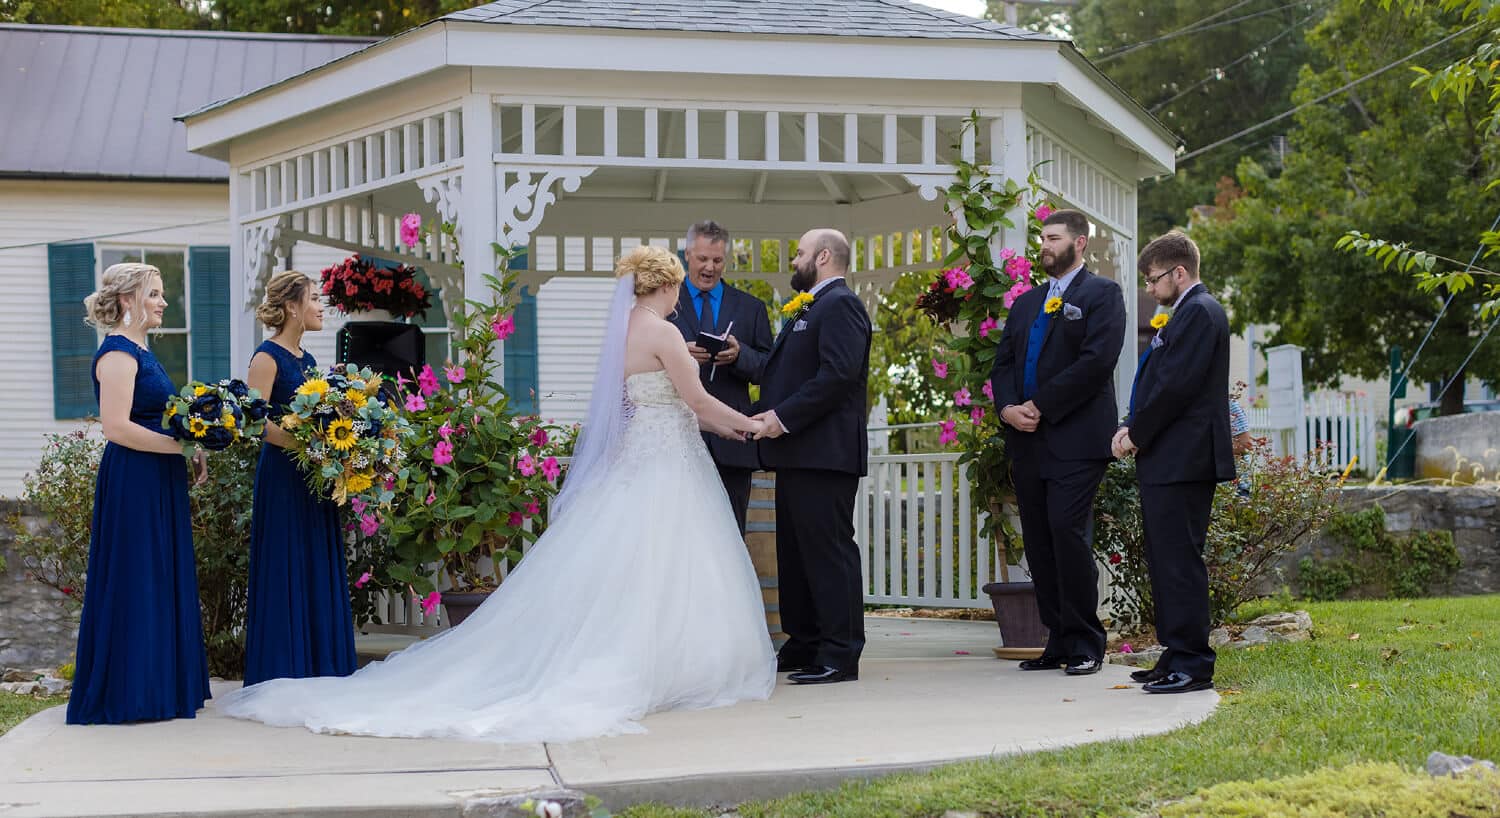 Close-up view of minister performing ceremony with bride and groom holding hands in front of white gazebo with wedding party observing.